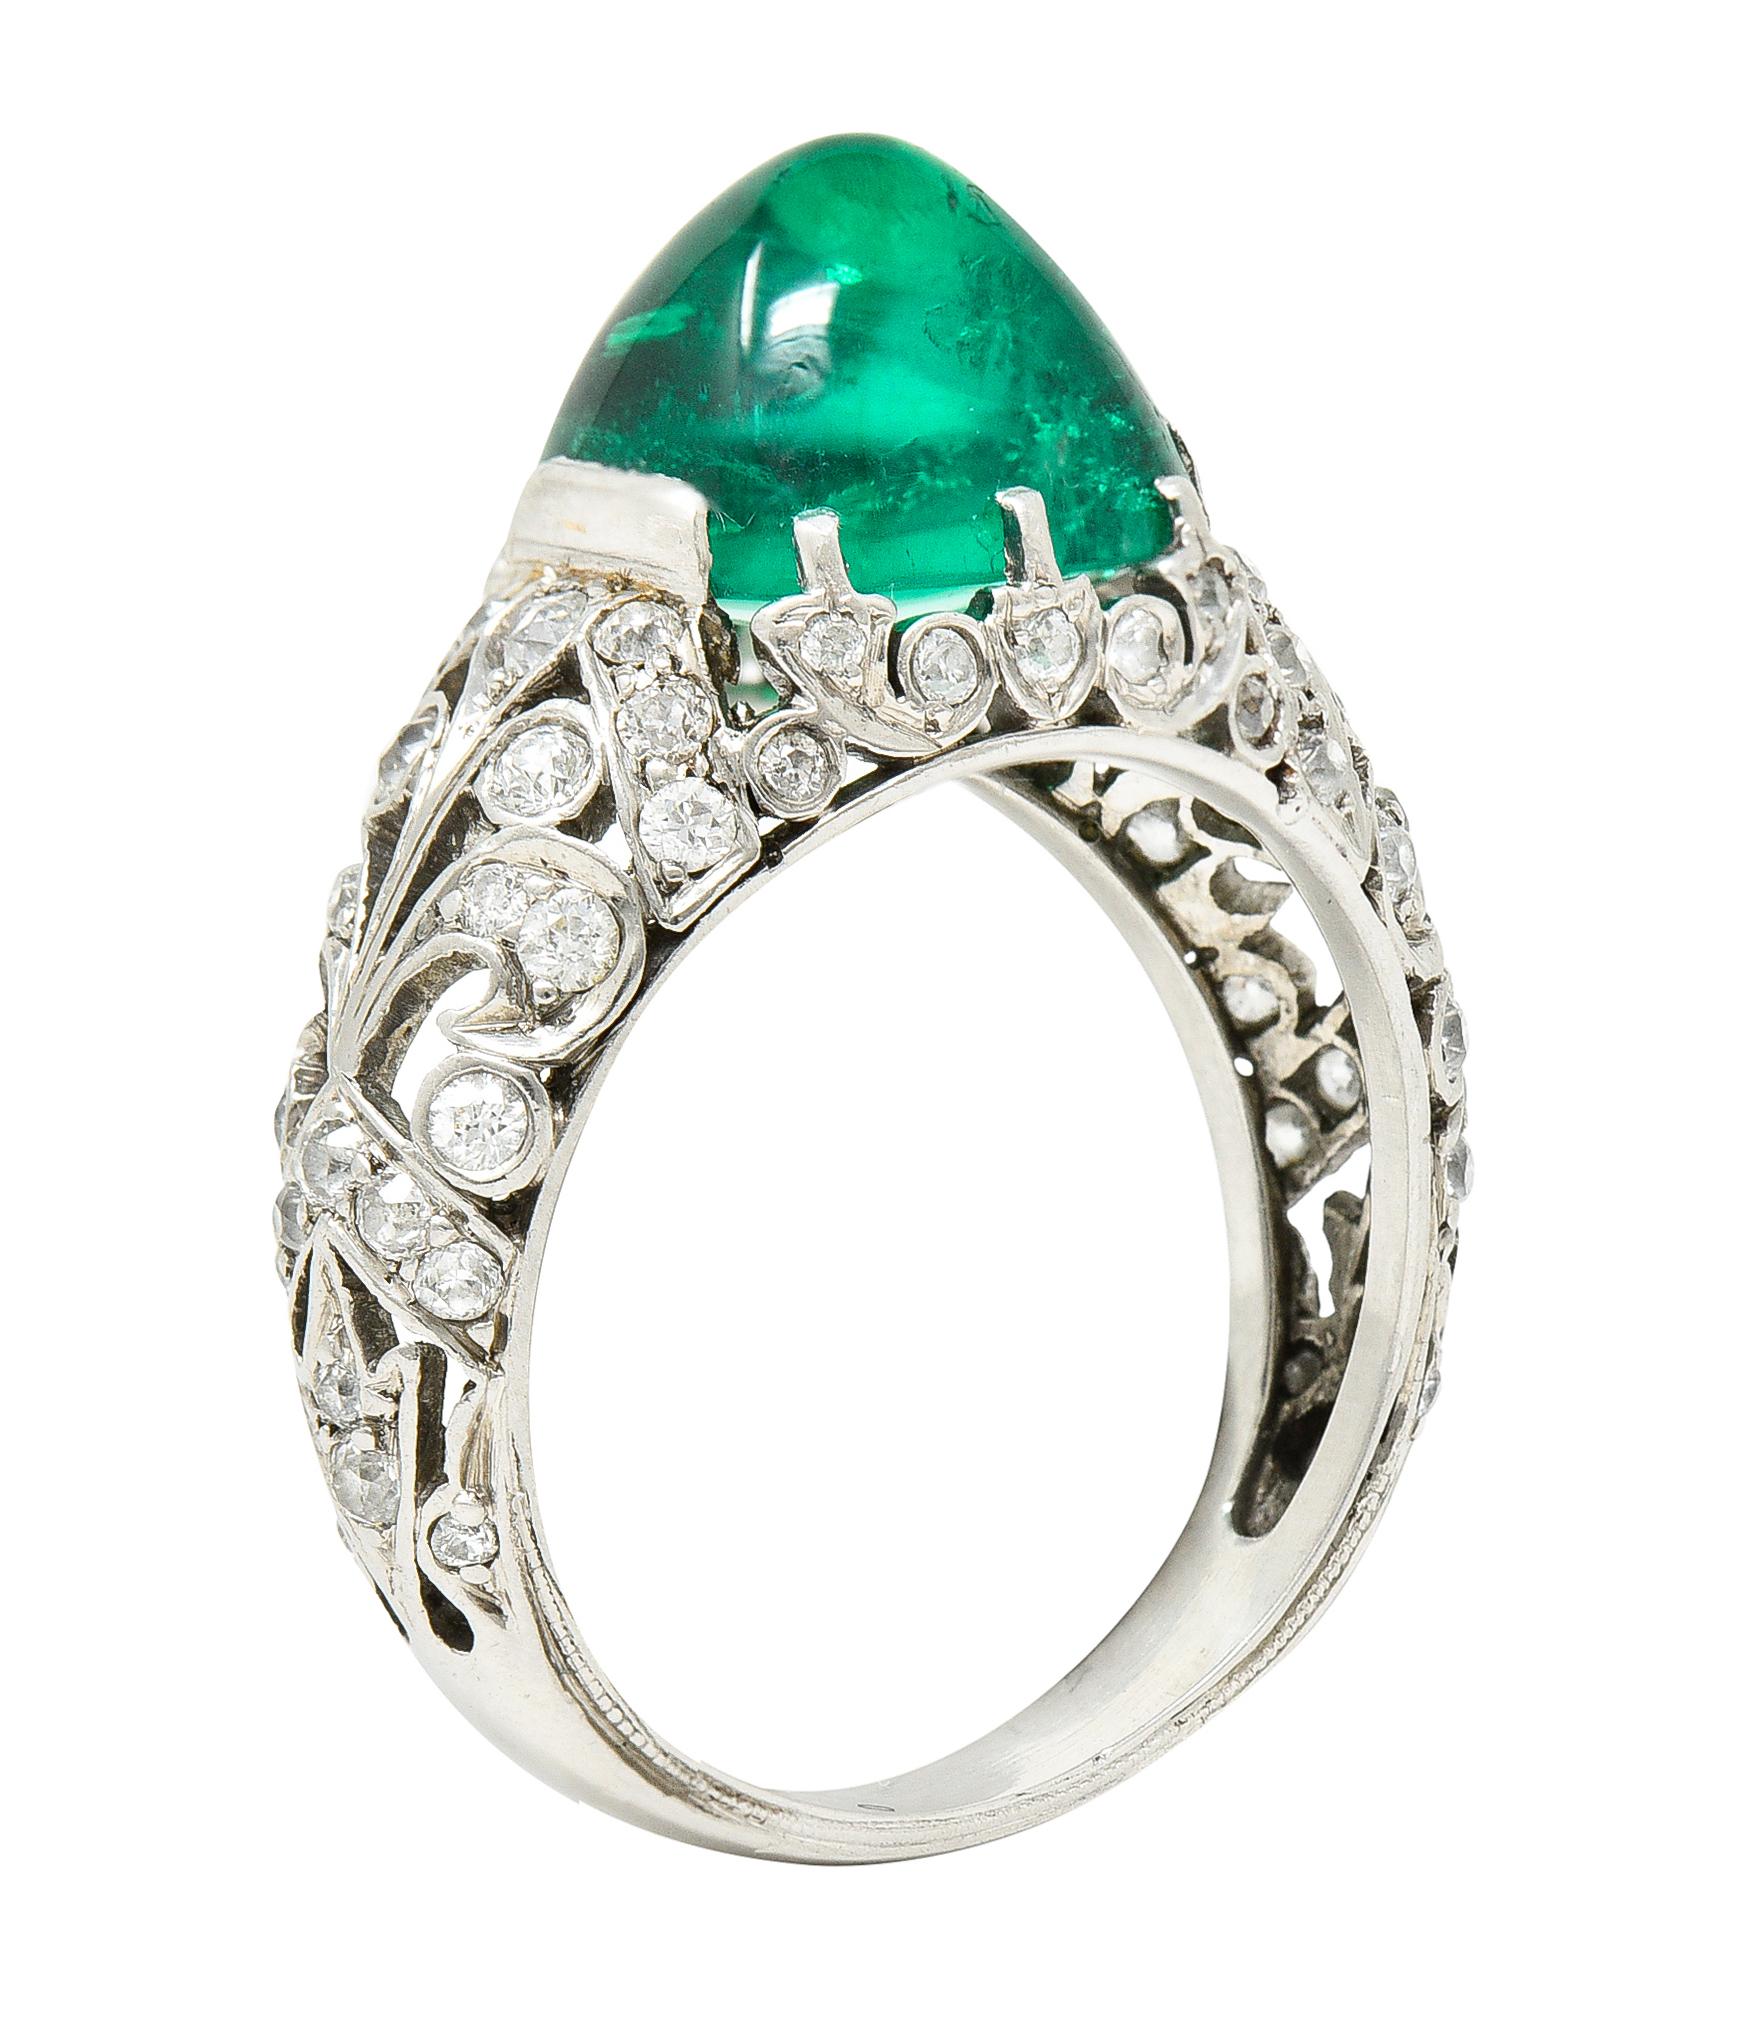 Centering a sugarloaf shaped emerald cabochon - transparent medium green in color. Natural Columbian in origin with minor traditional clarity enhancement. Weighing approximately 4.32 carats total. Prong and tab set with a pierced gallery surround.